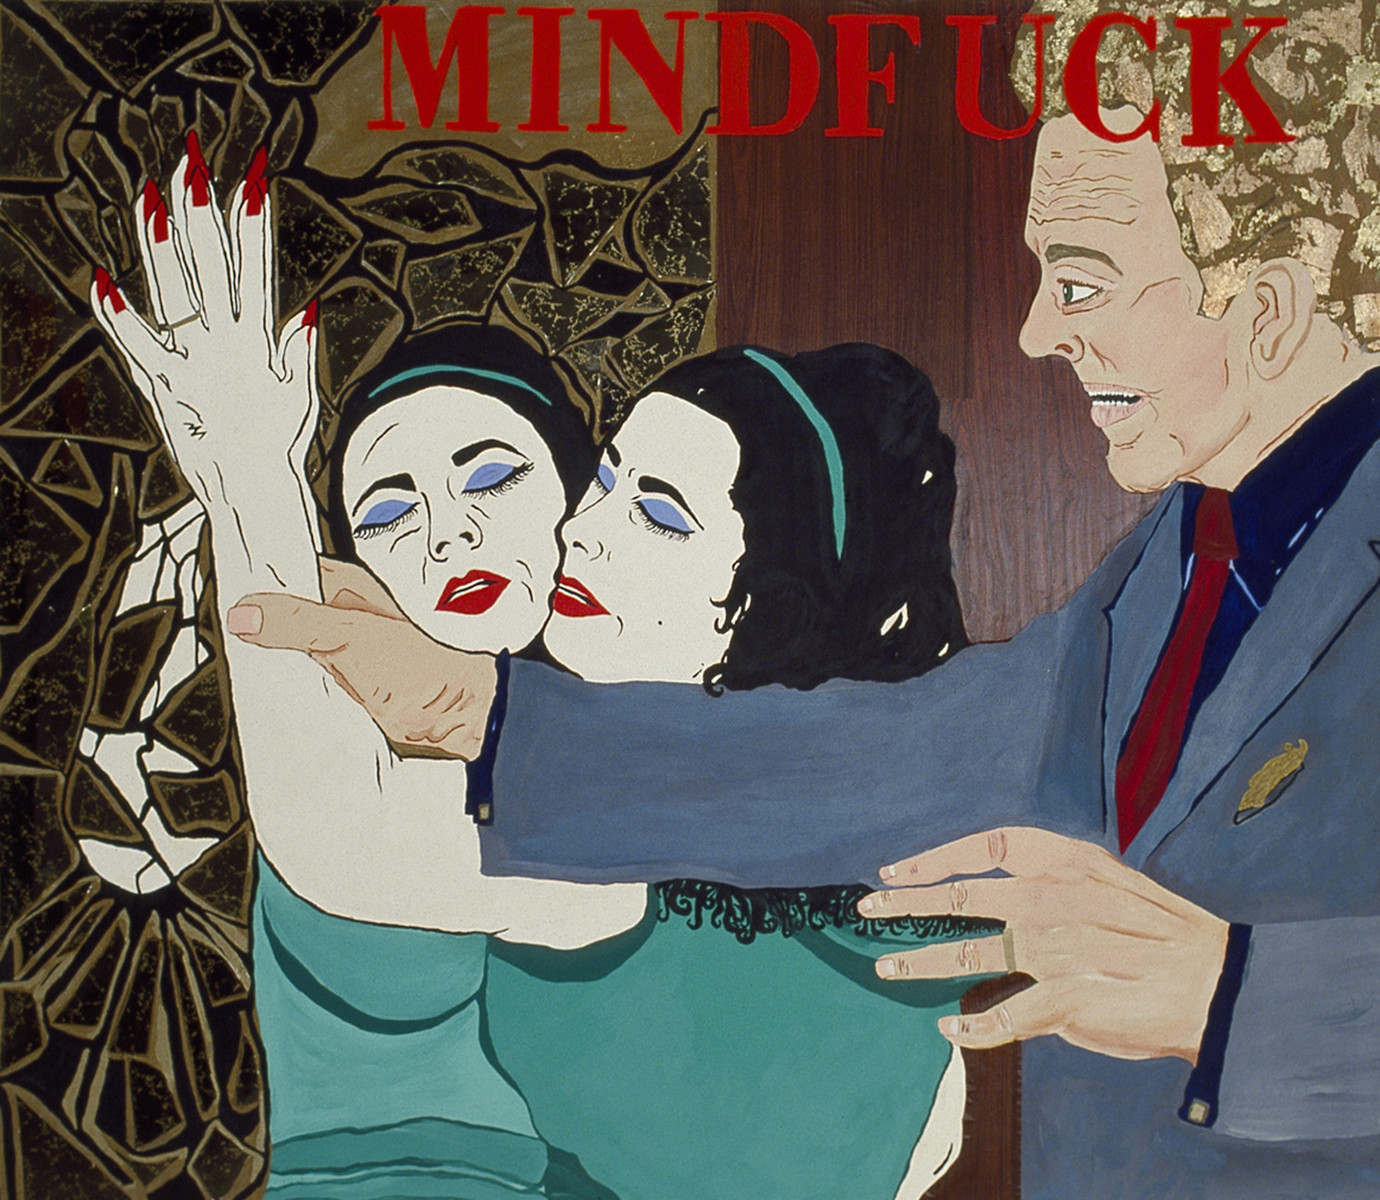 Mindfuck: from the Liz Taylor Series (The VIPs)